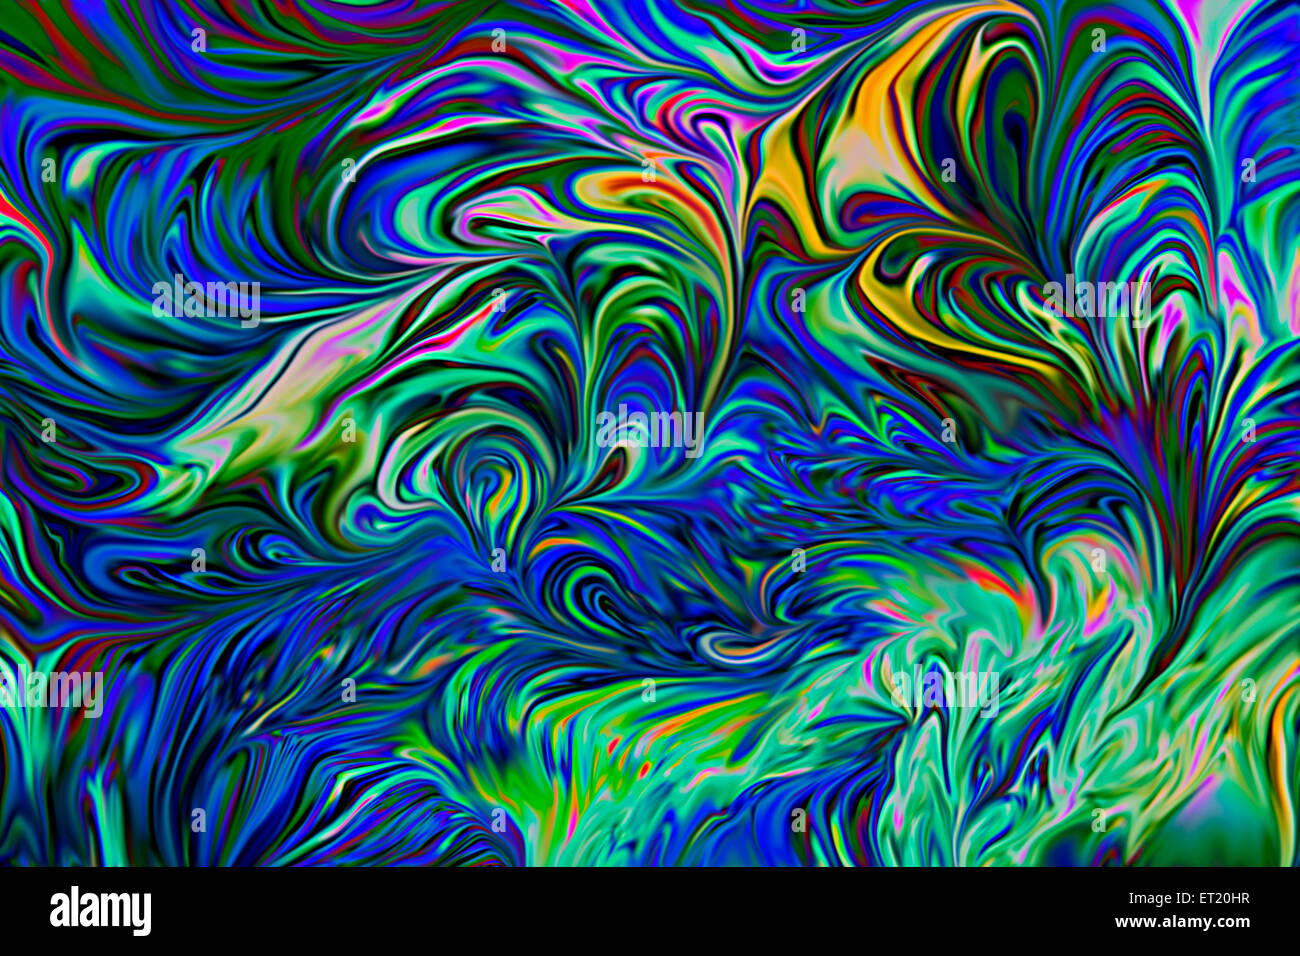 digital art, digital technology, computer generated, computer art, multimedia art, new media art, digital painting, colorful background, Stock Photo